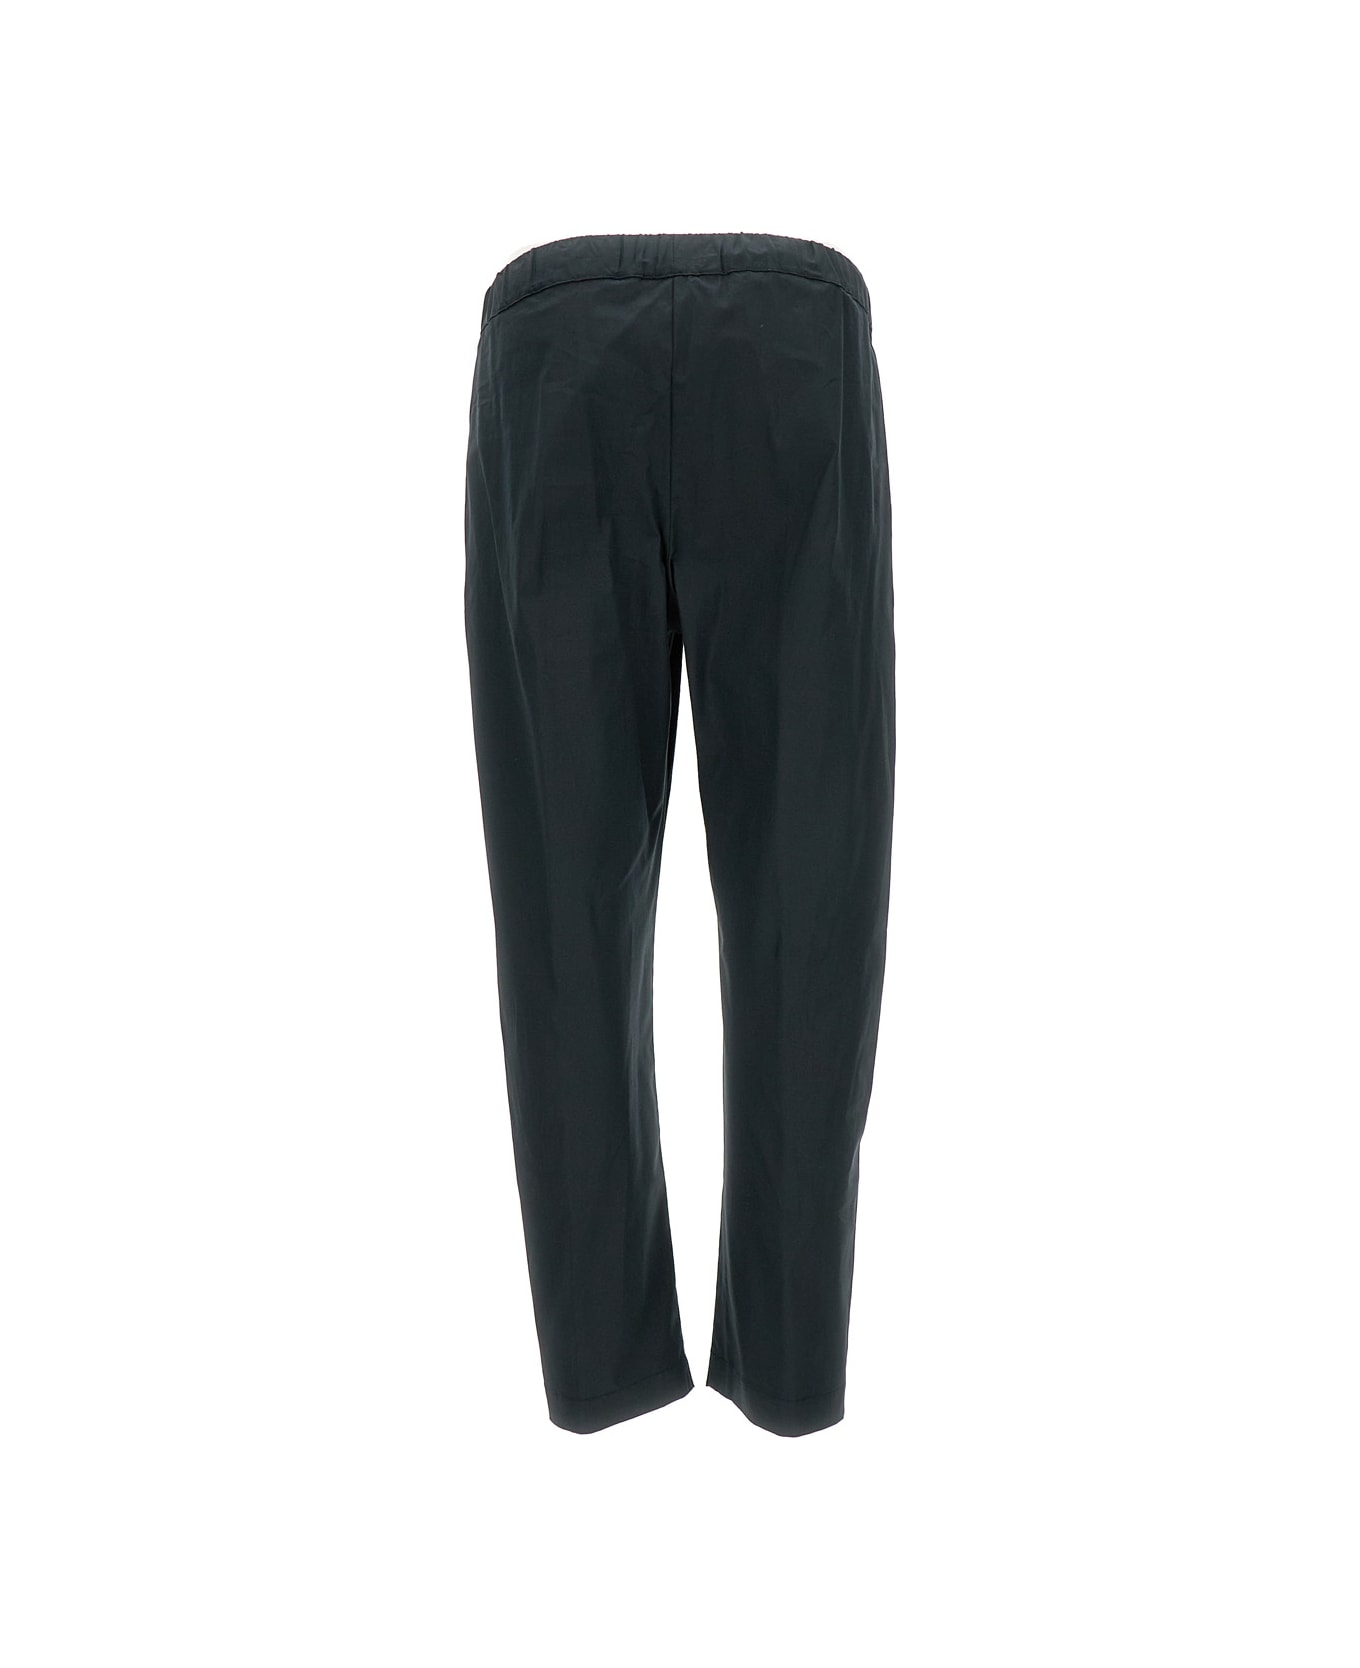 SEMICOUTURE Black Crop Cut Pants In Cotton Blend Woman - Black ボトムス